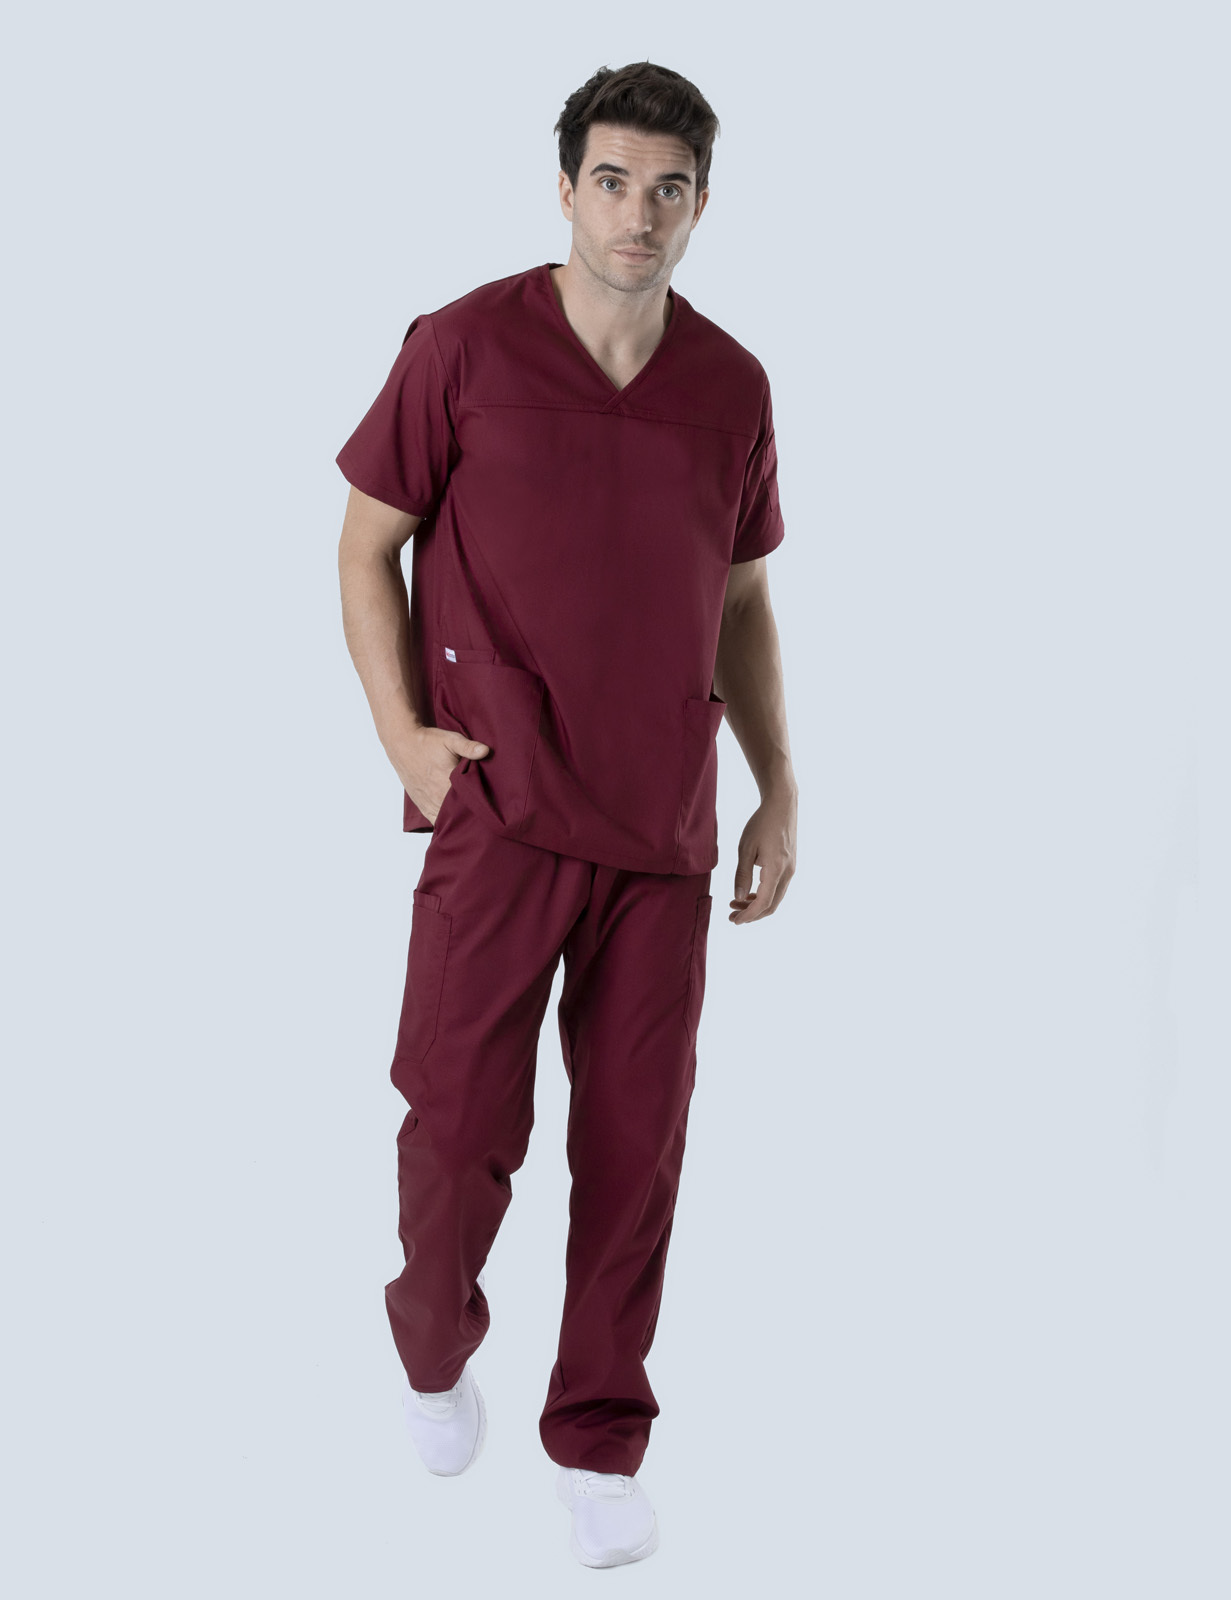 Men's Fit Solid Scrub Top - Burgundy - X Large - 0